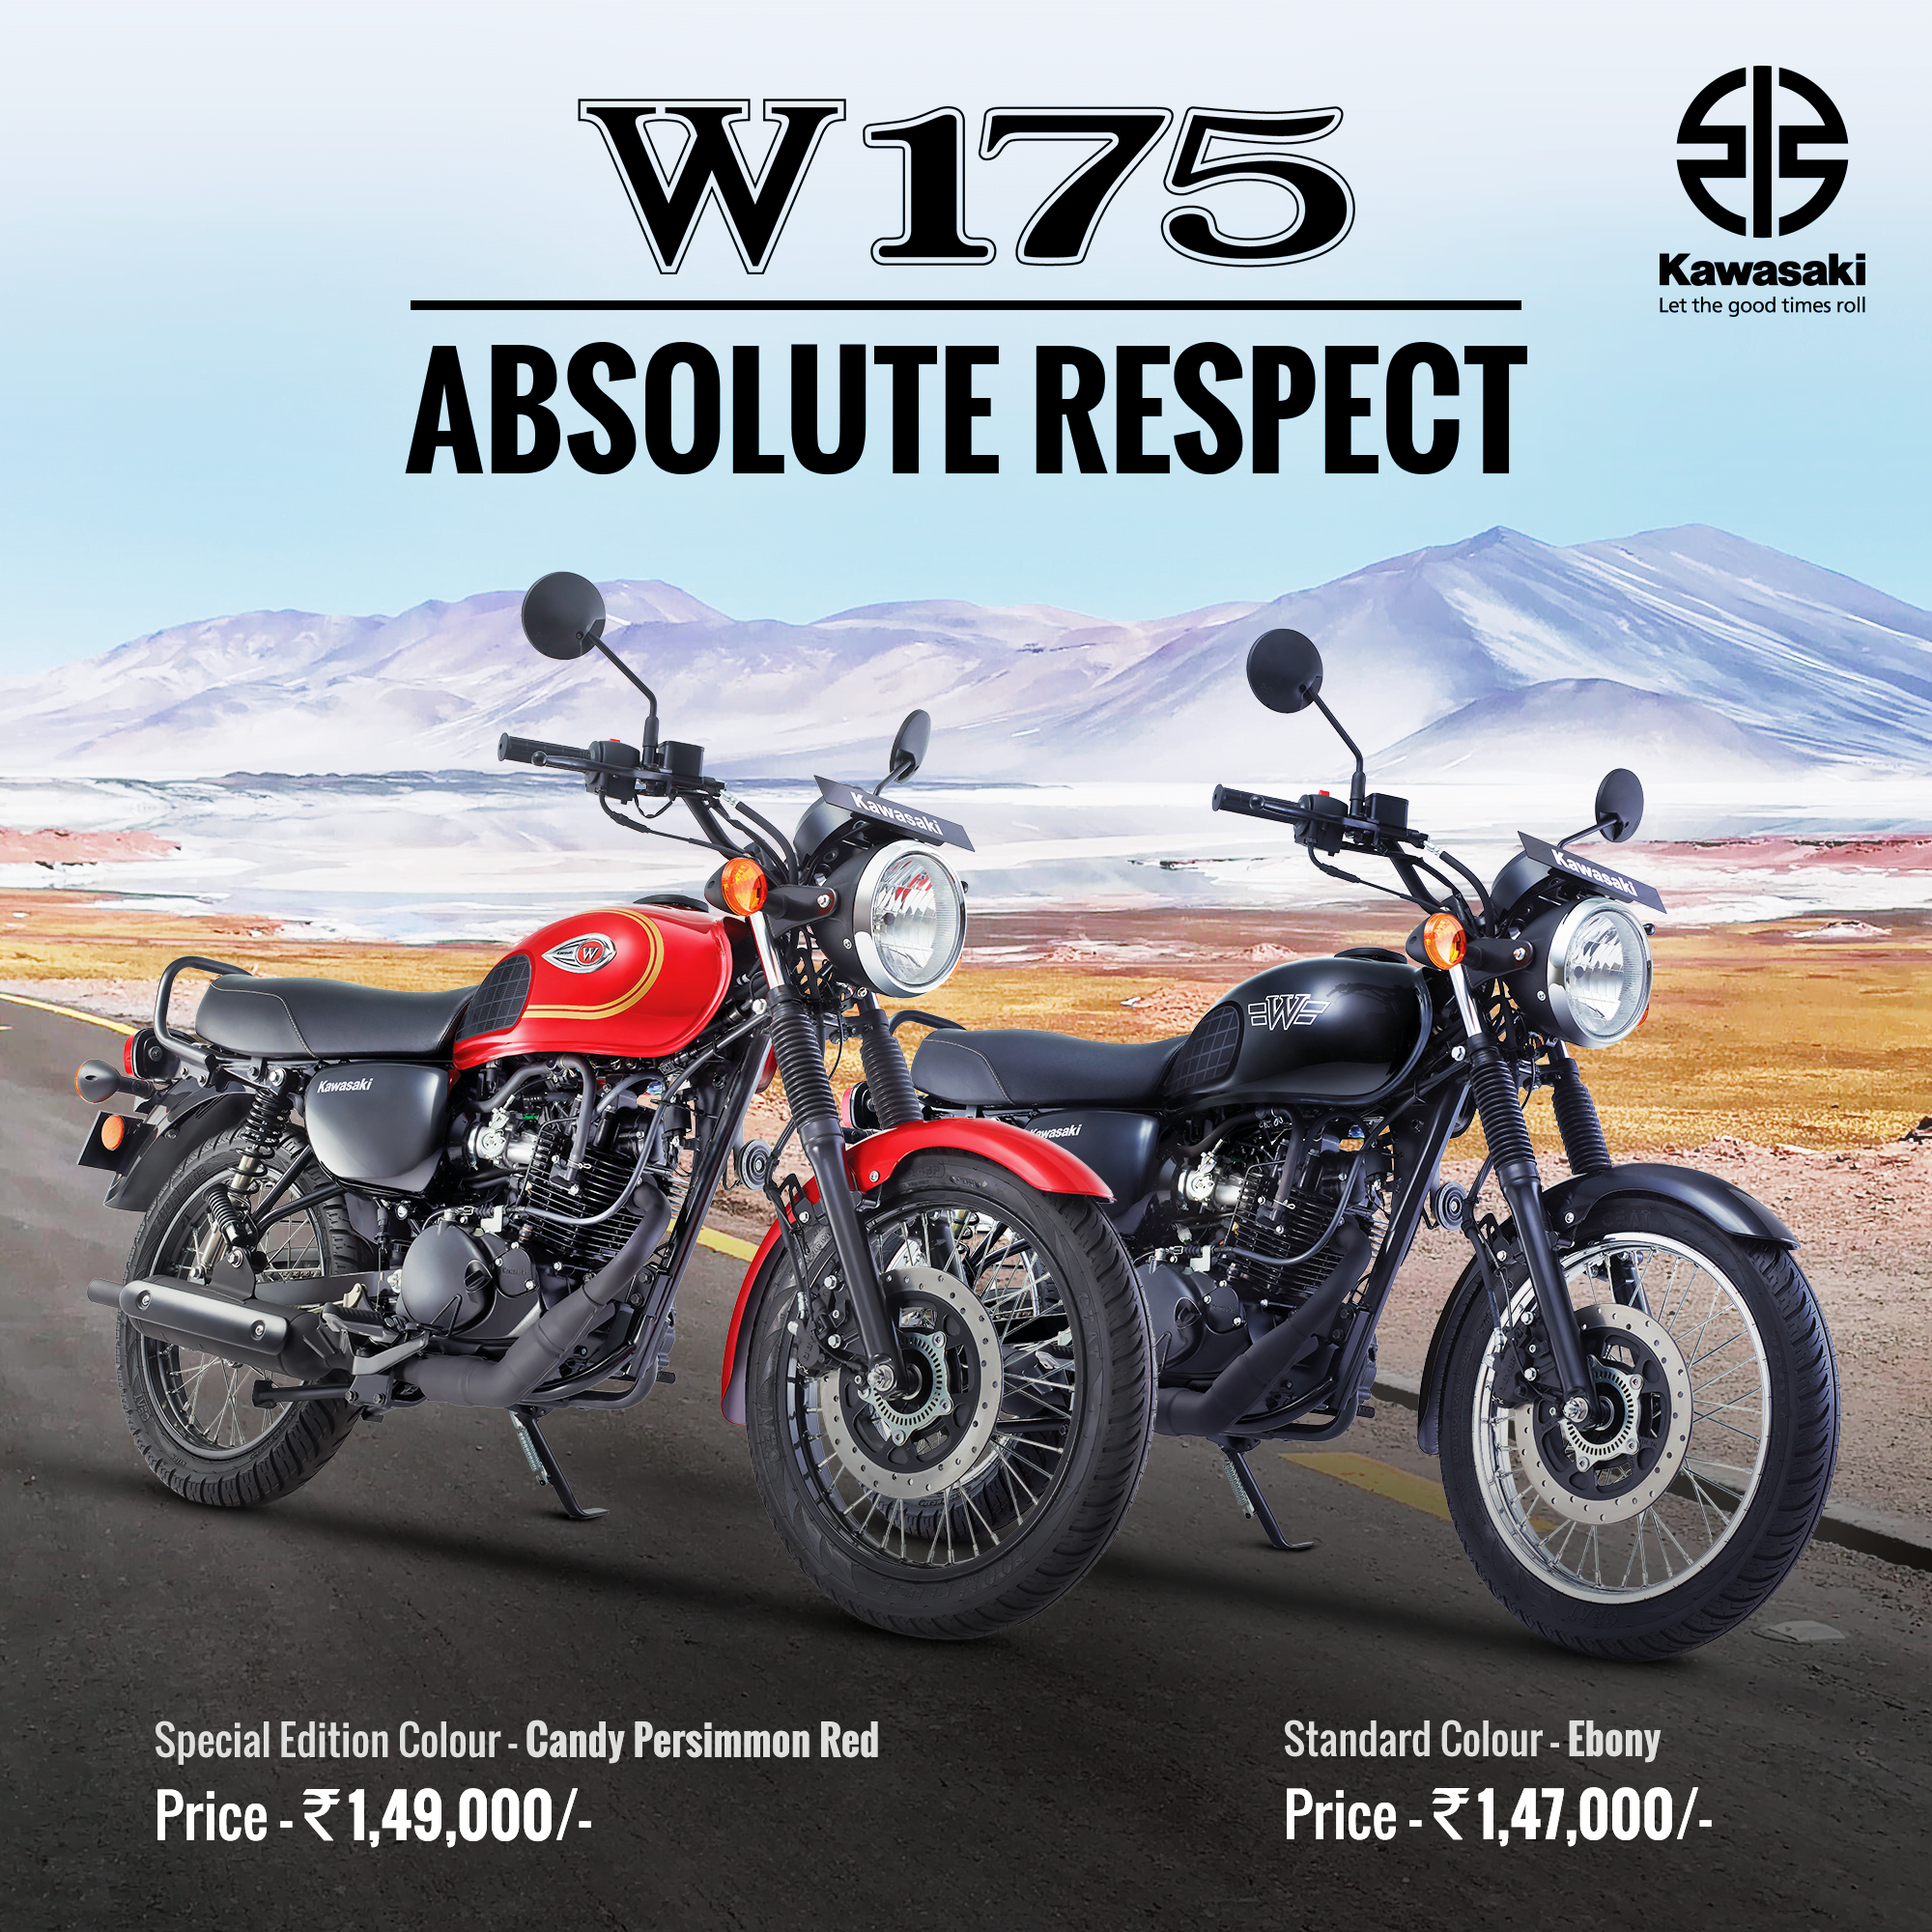 Kawasaki W175 India Launch Price Revealed - Made In India!